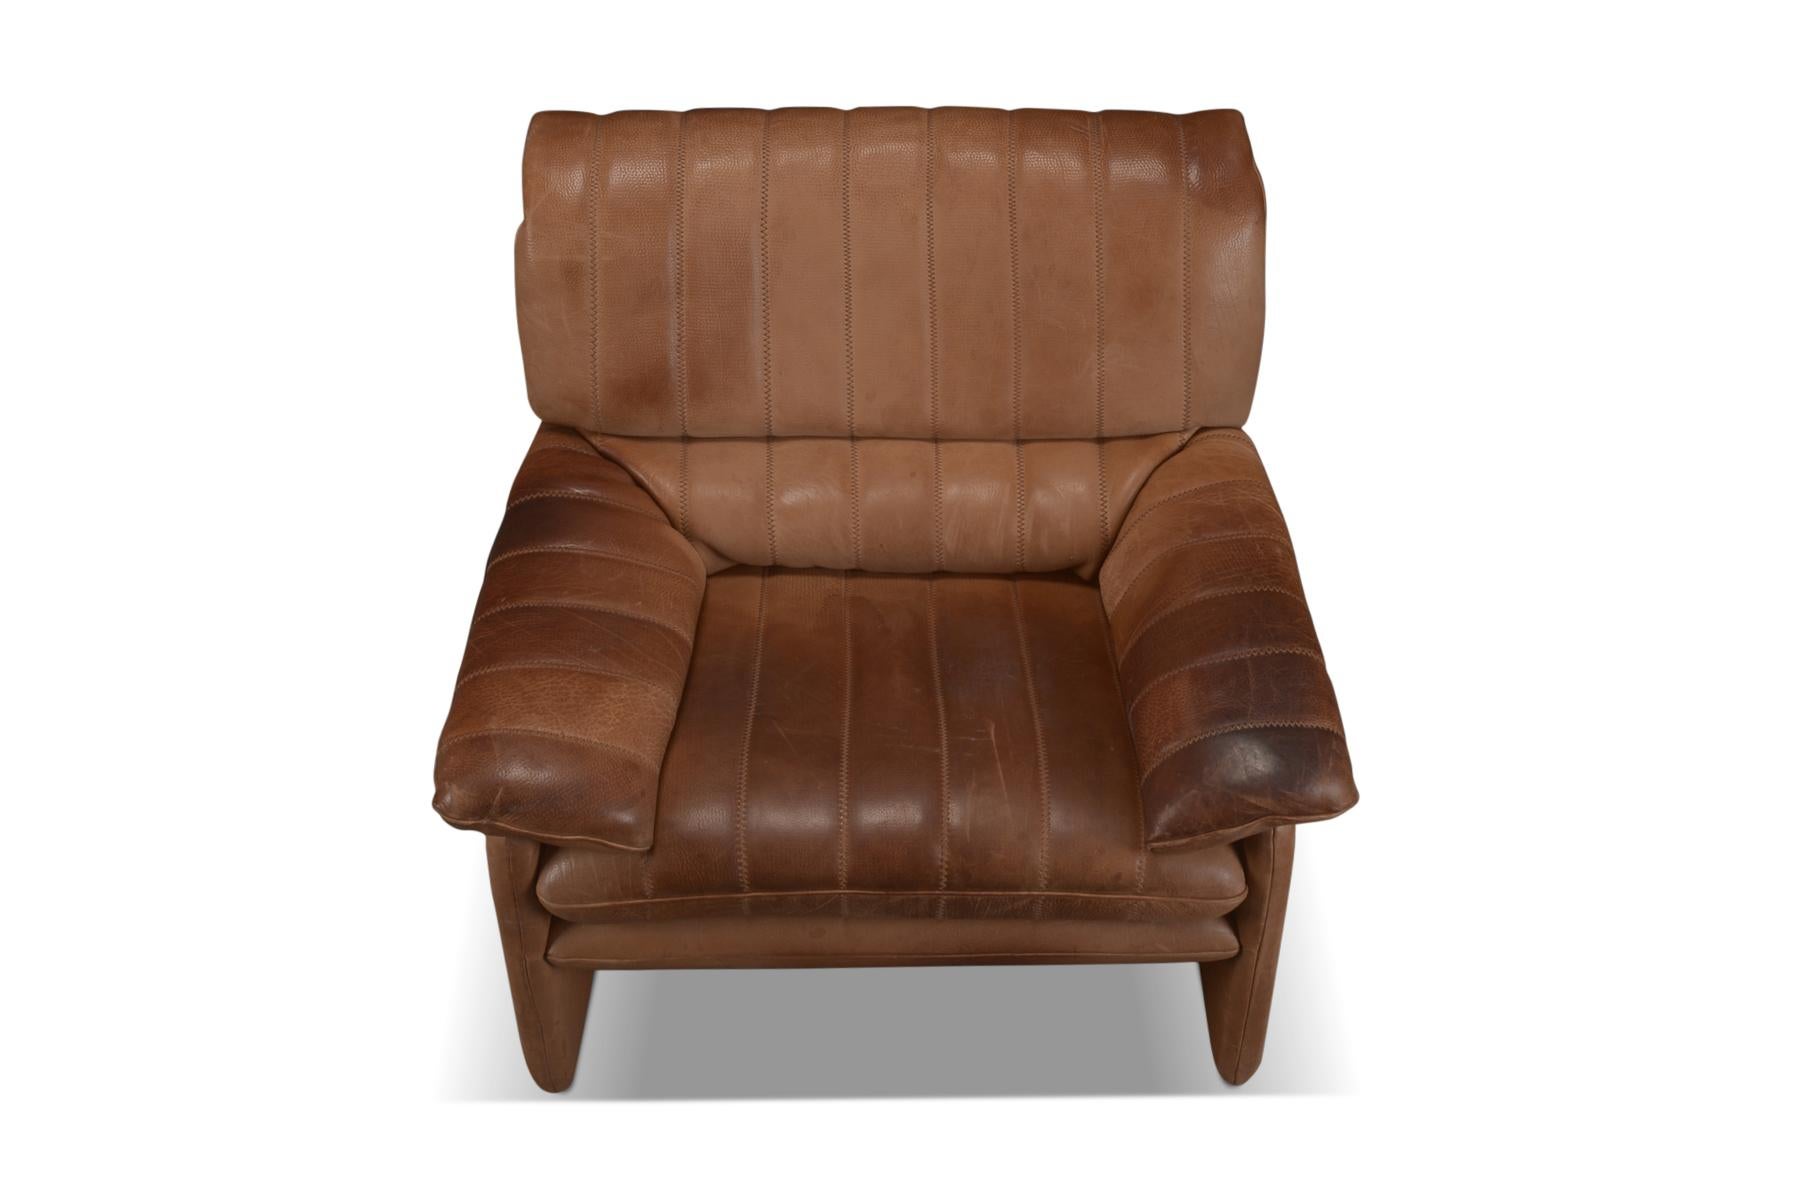 Model Ds-86 Leather Lounge Chair by Desede In Excellent Condition For Sale In Berkeley, CA